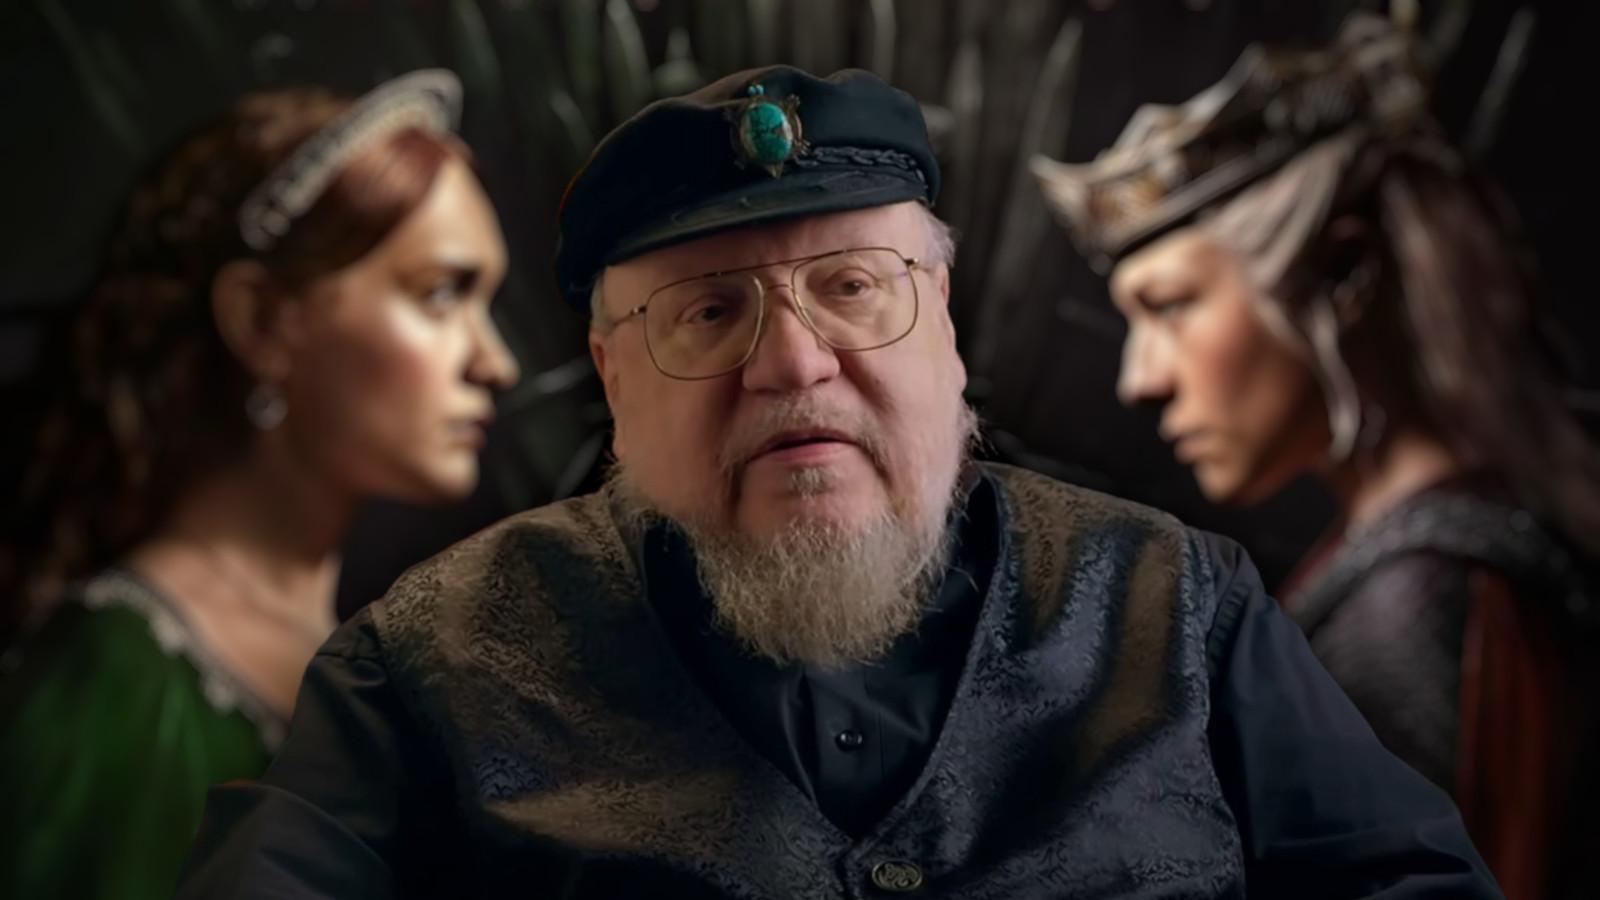 Here's everything George R.R. Martin has said about House of the Dragon Season 2: George R.R. Martin with the House of the Dragon poster in the background